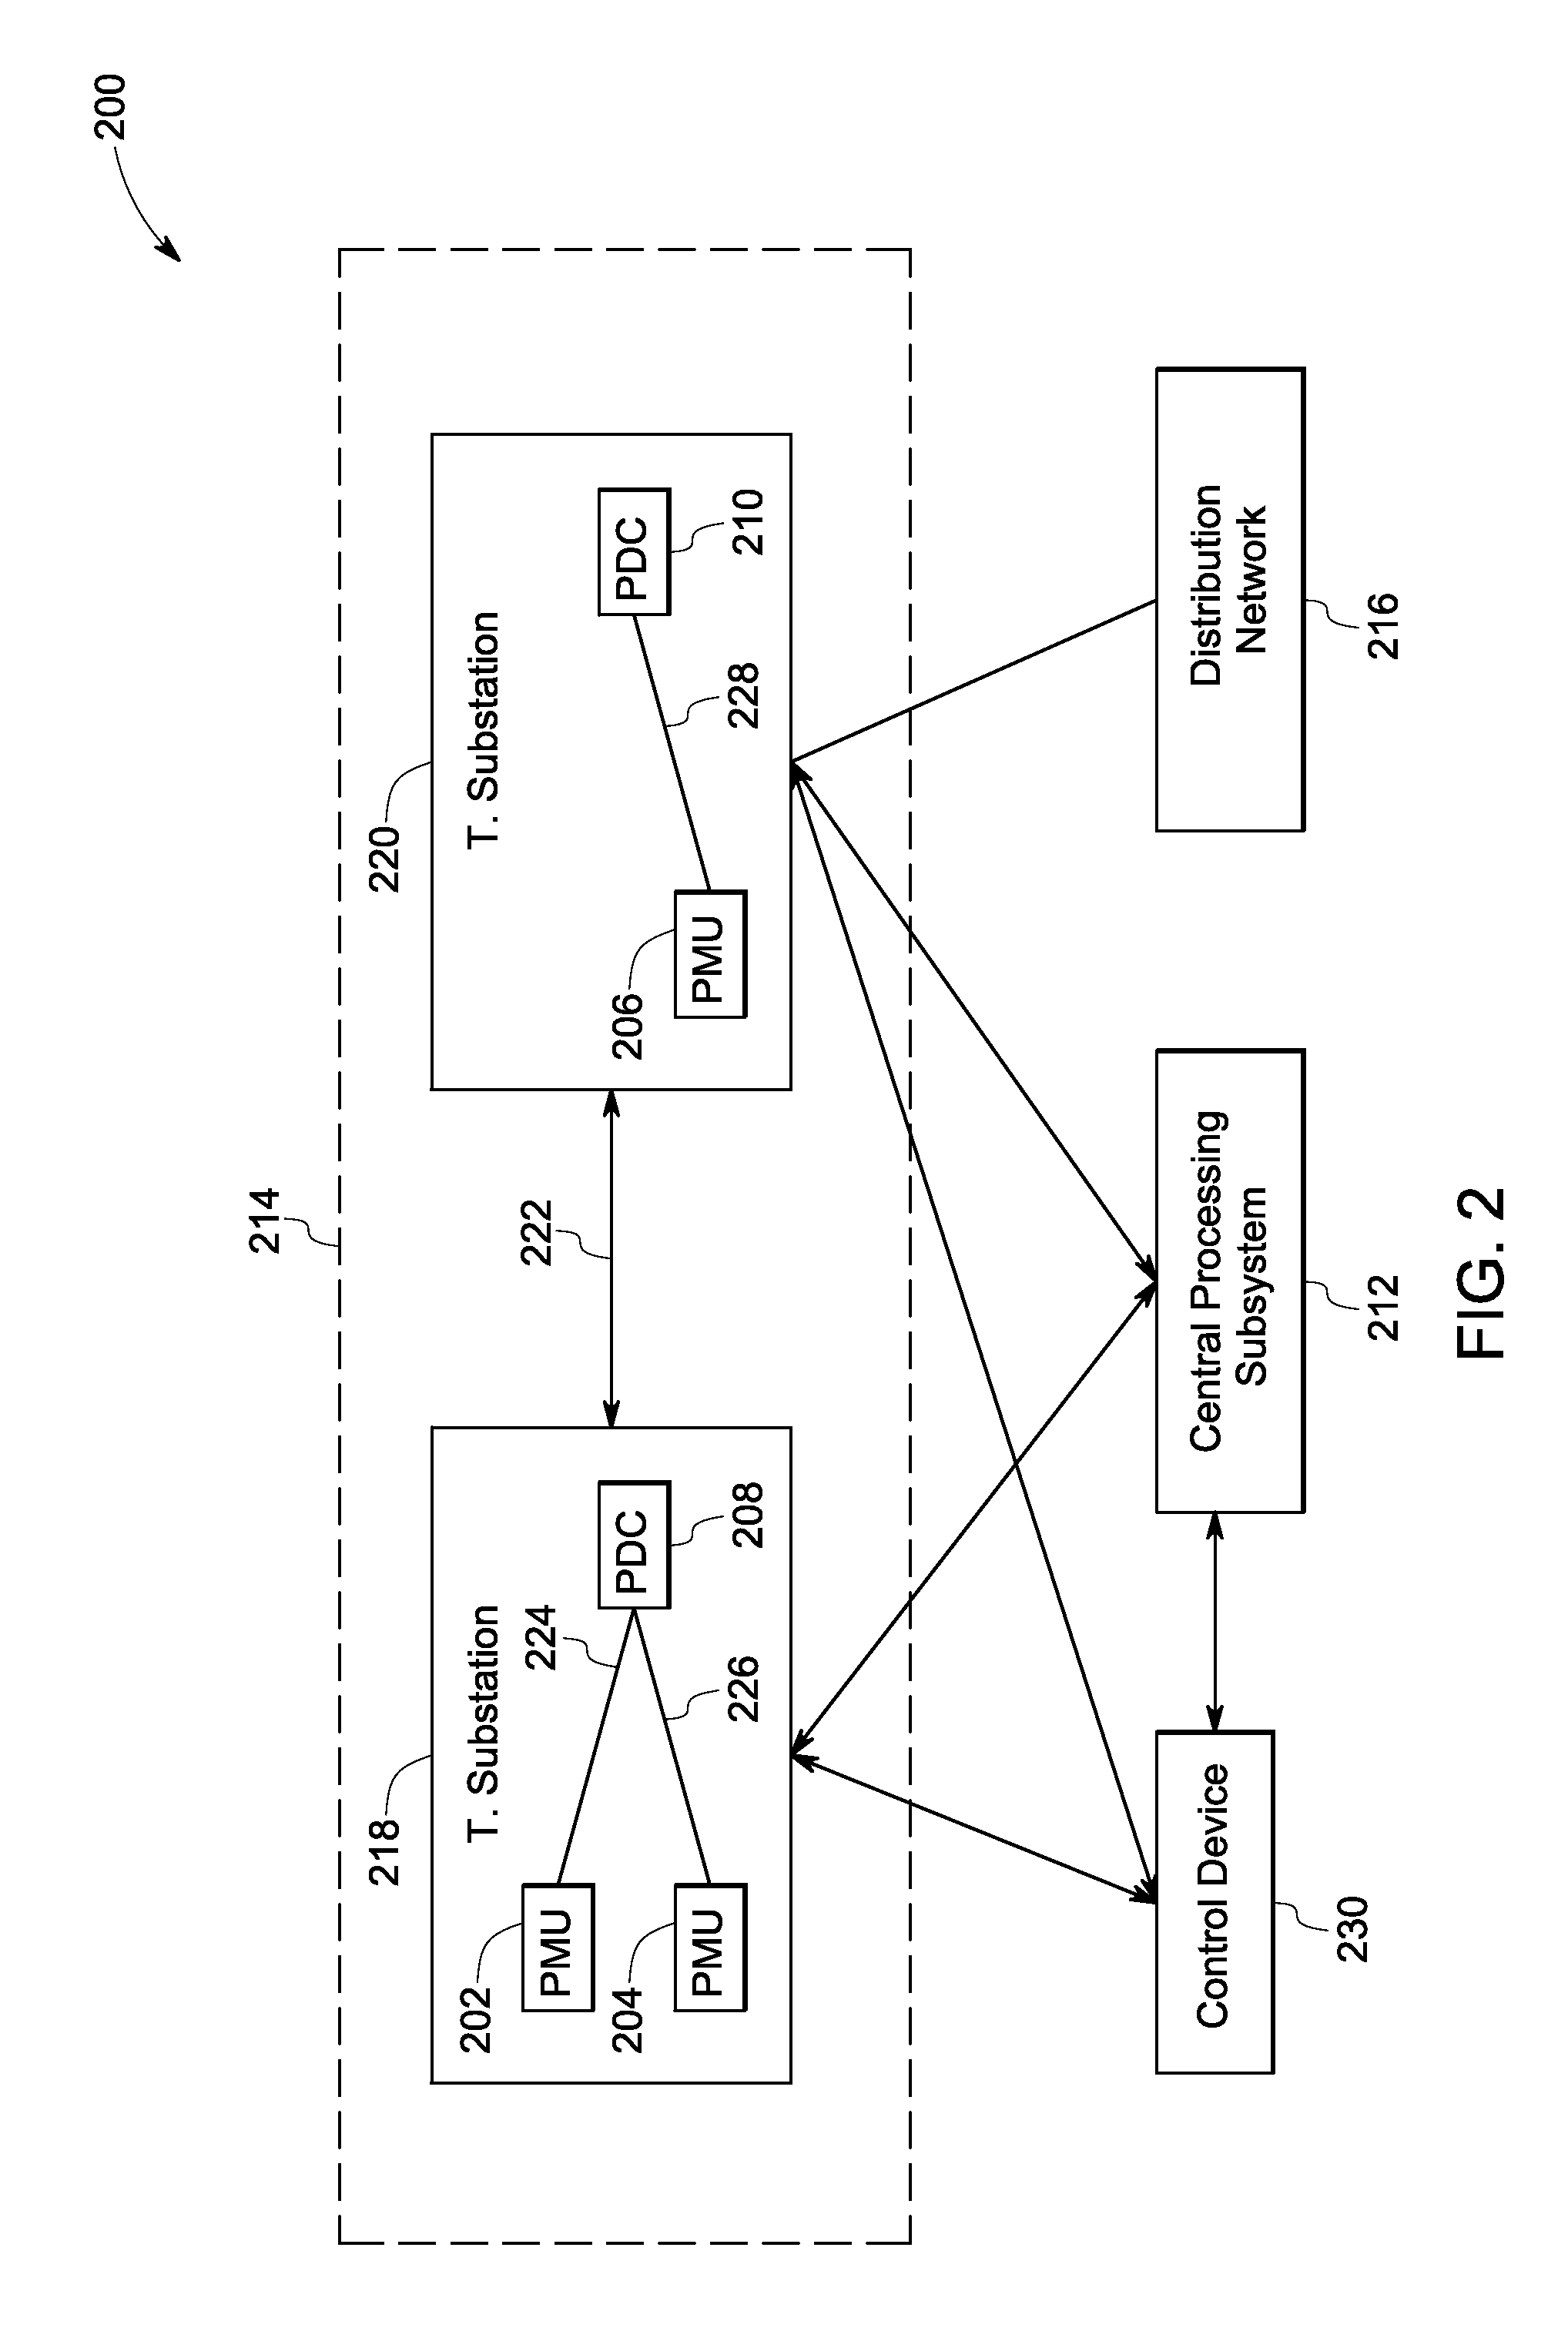 System and method for real-time monitoring of power system